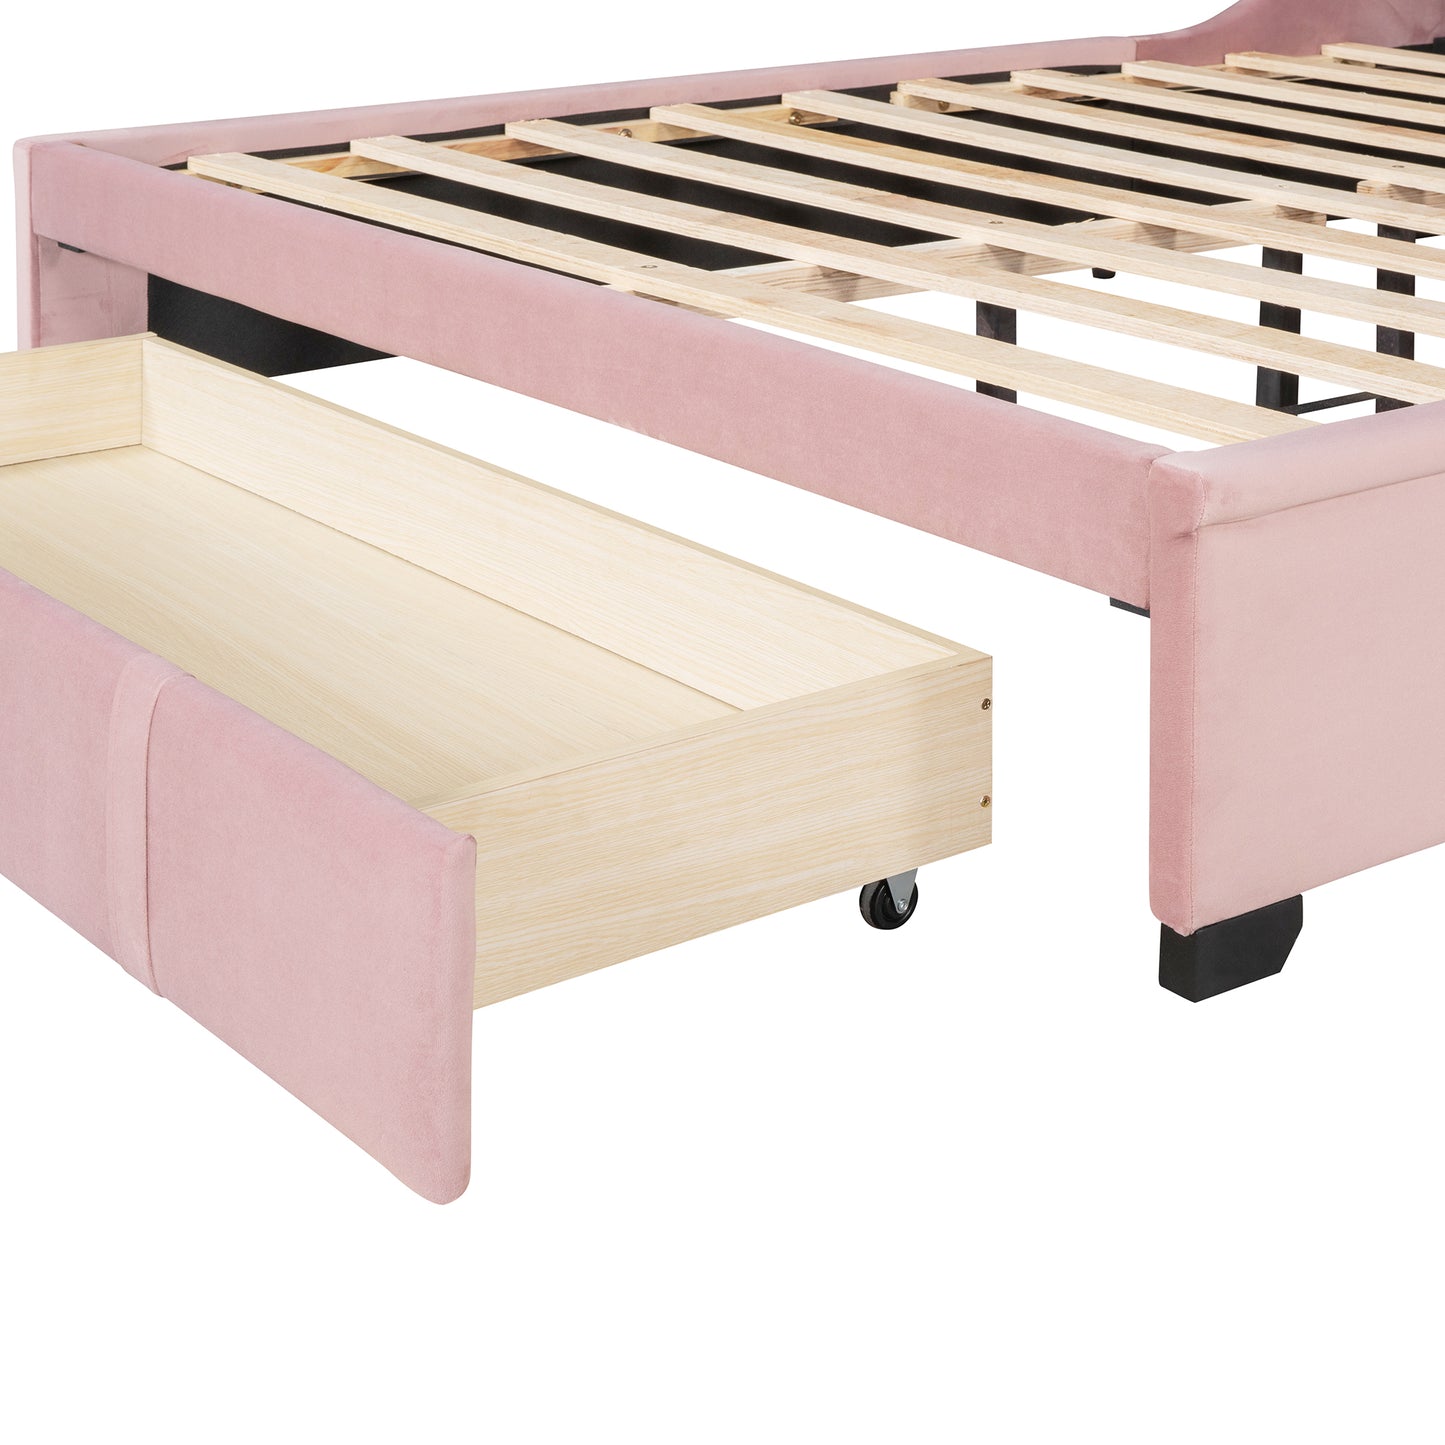 Queen-Size Pink Velvet Upholstered Platform Bed with Wingback Headboard and Single Large Storage Drawer